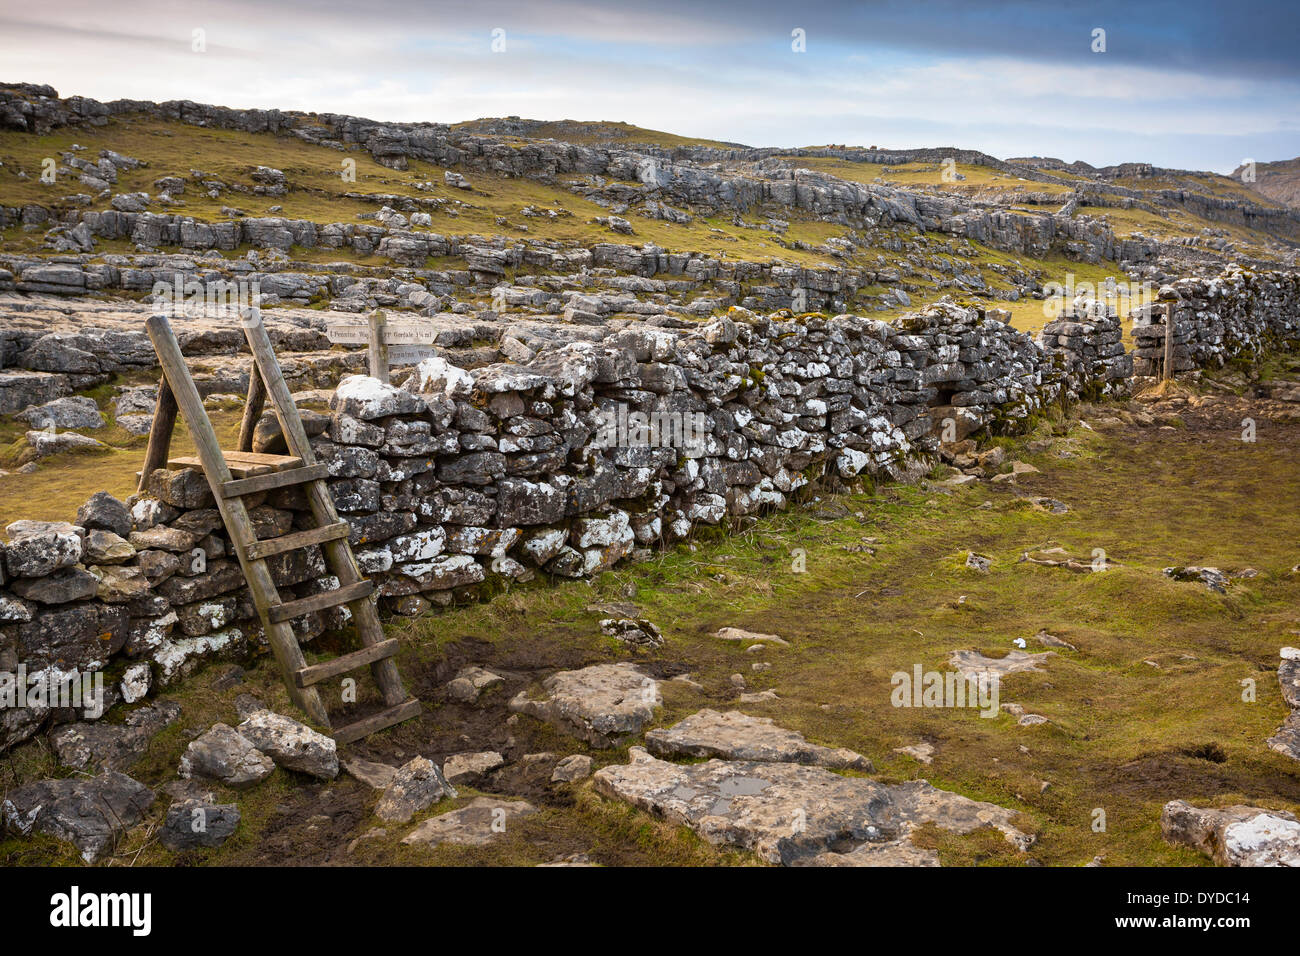 A wooden stile over a stone wall in the Yorkshire dales adjacent to a sign for the Pennine way at Malham Cove. Stock Photo